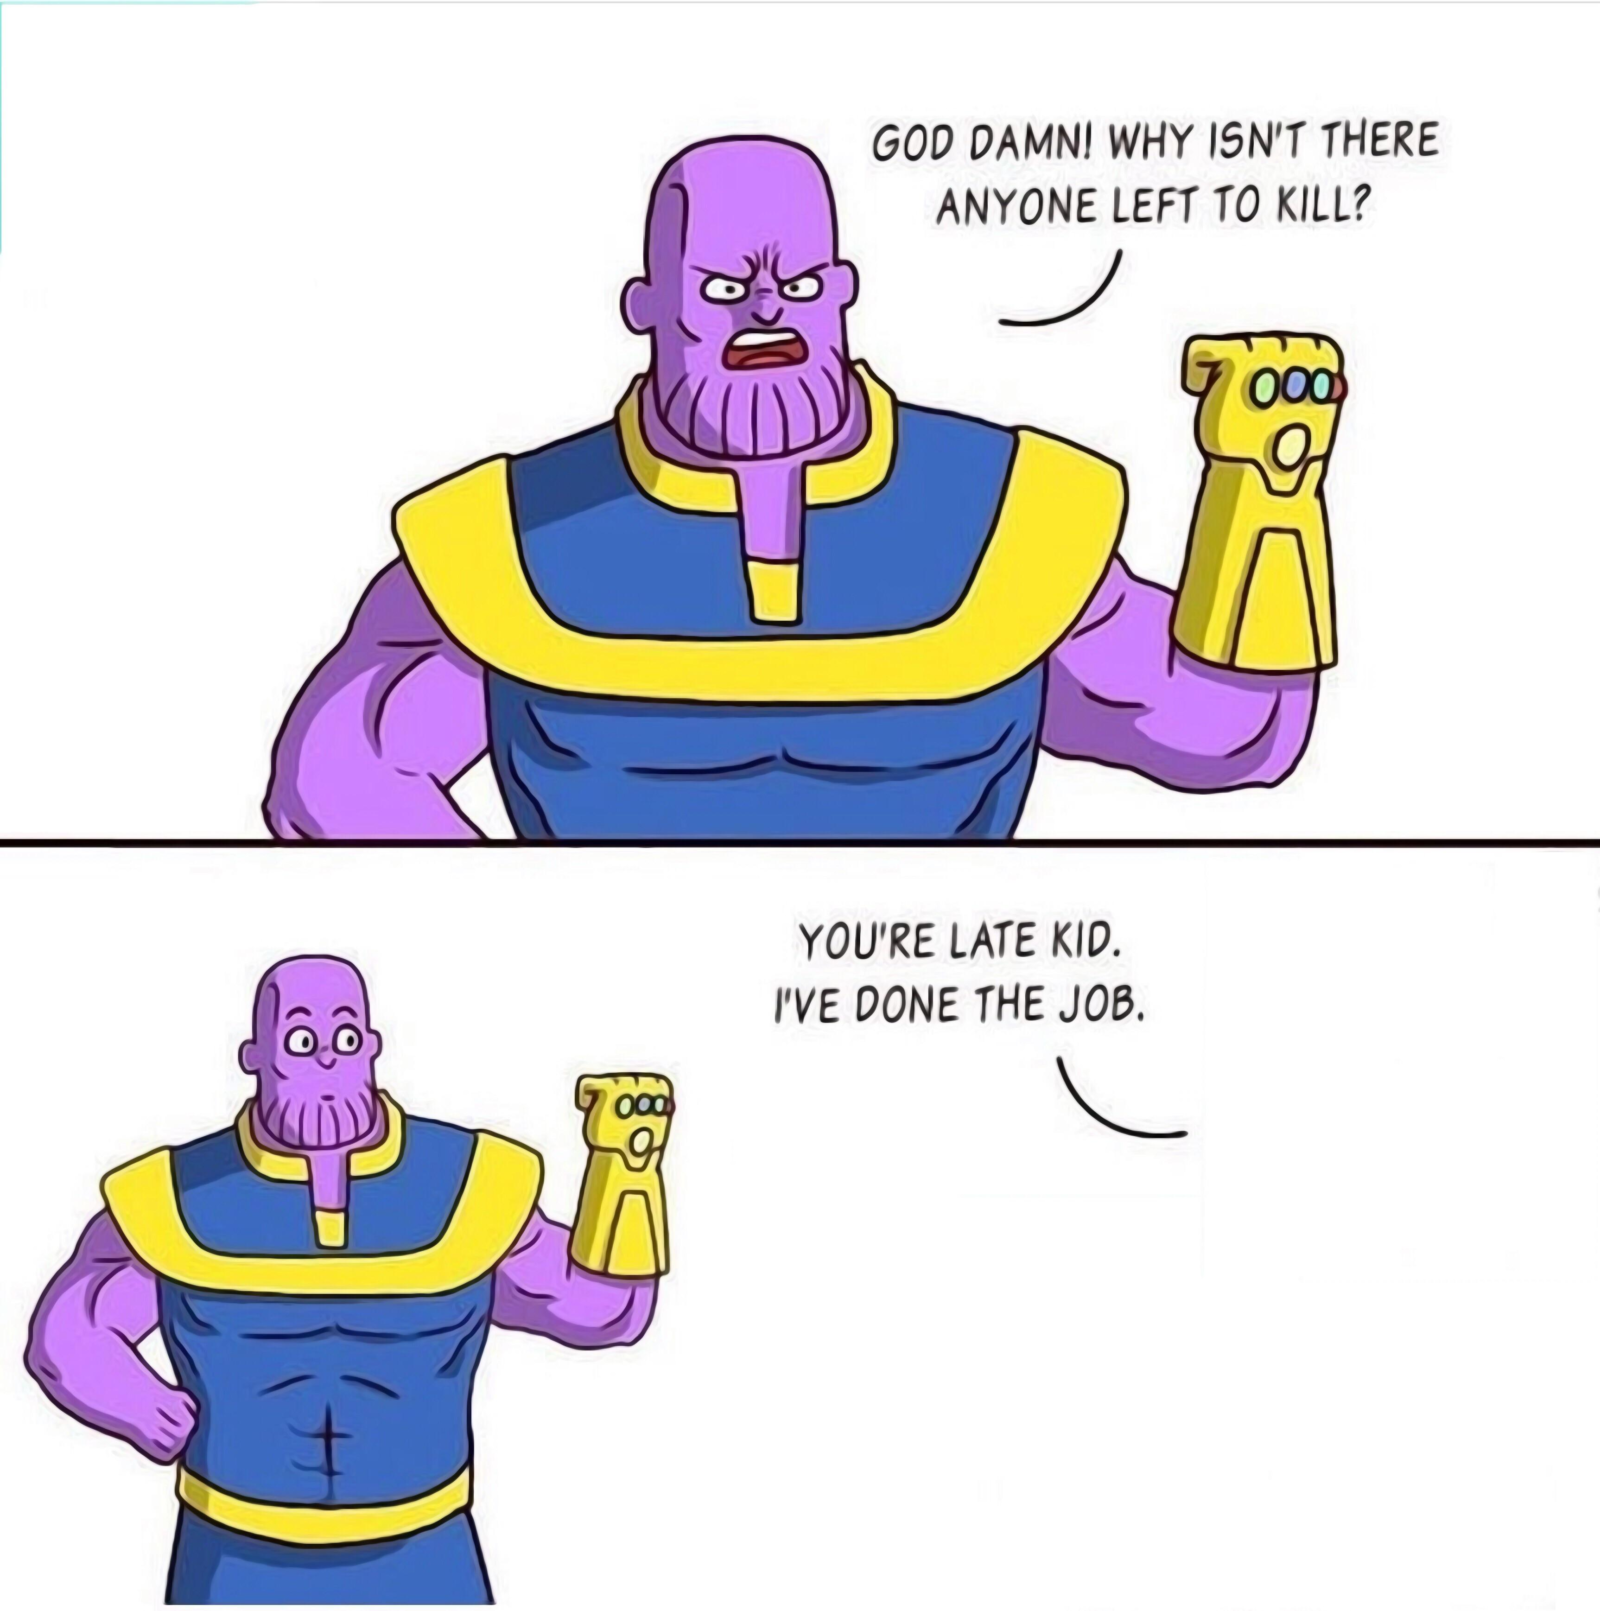 Thanos 'God damn why isnt there anyone left to kill' comic meme t...